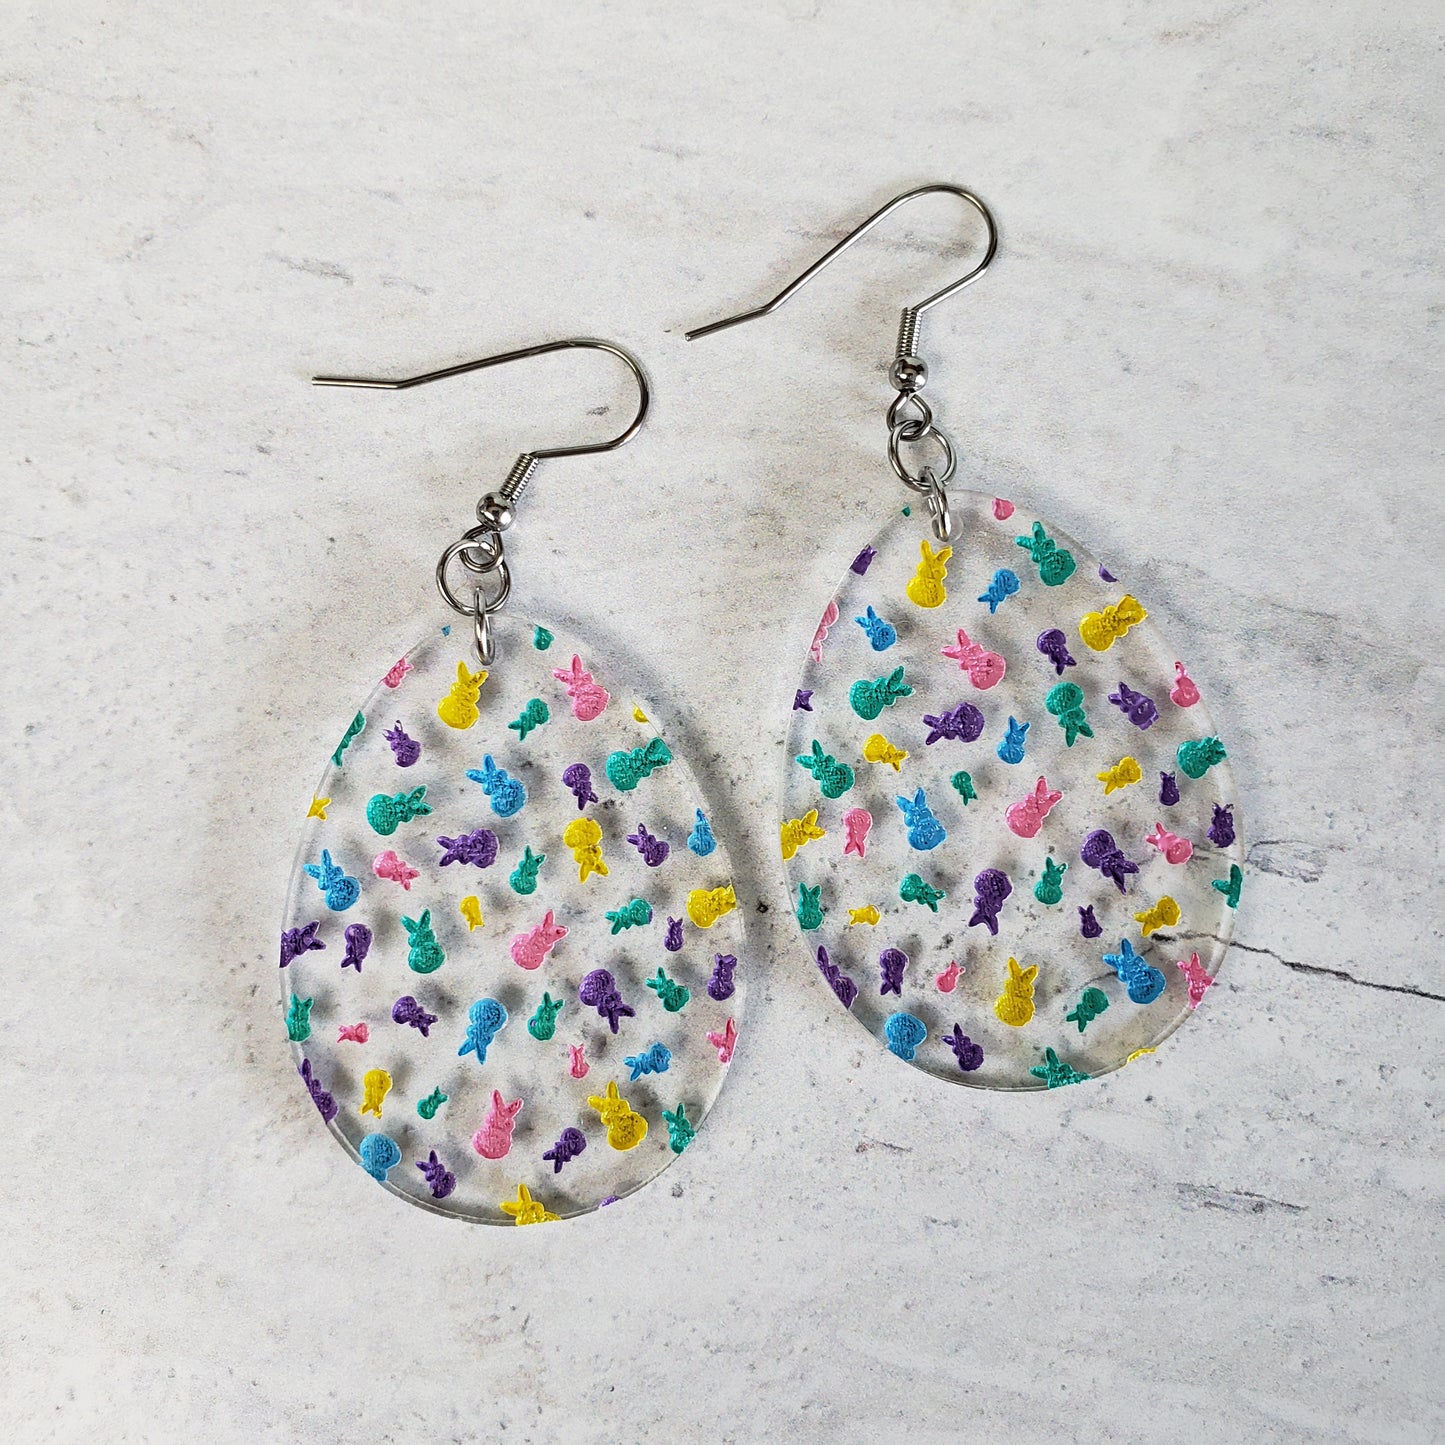 Clear egg shaped earrings with marshmallow bunnies engraved and hand painted in traditional Easter colors.